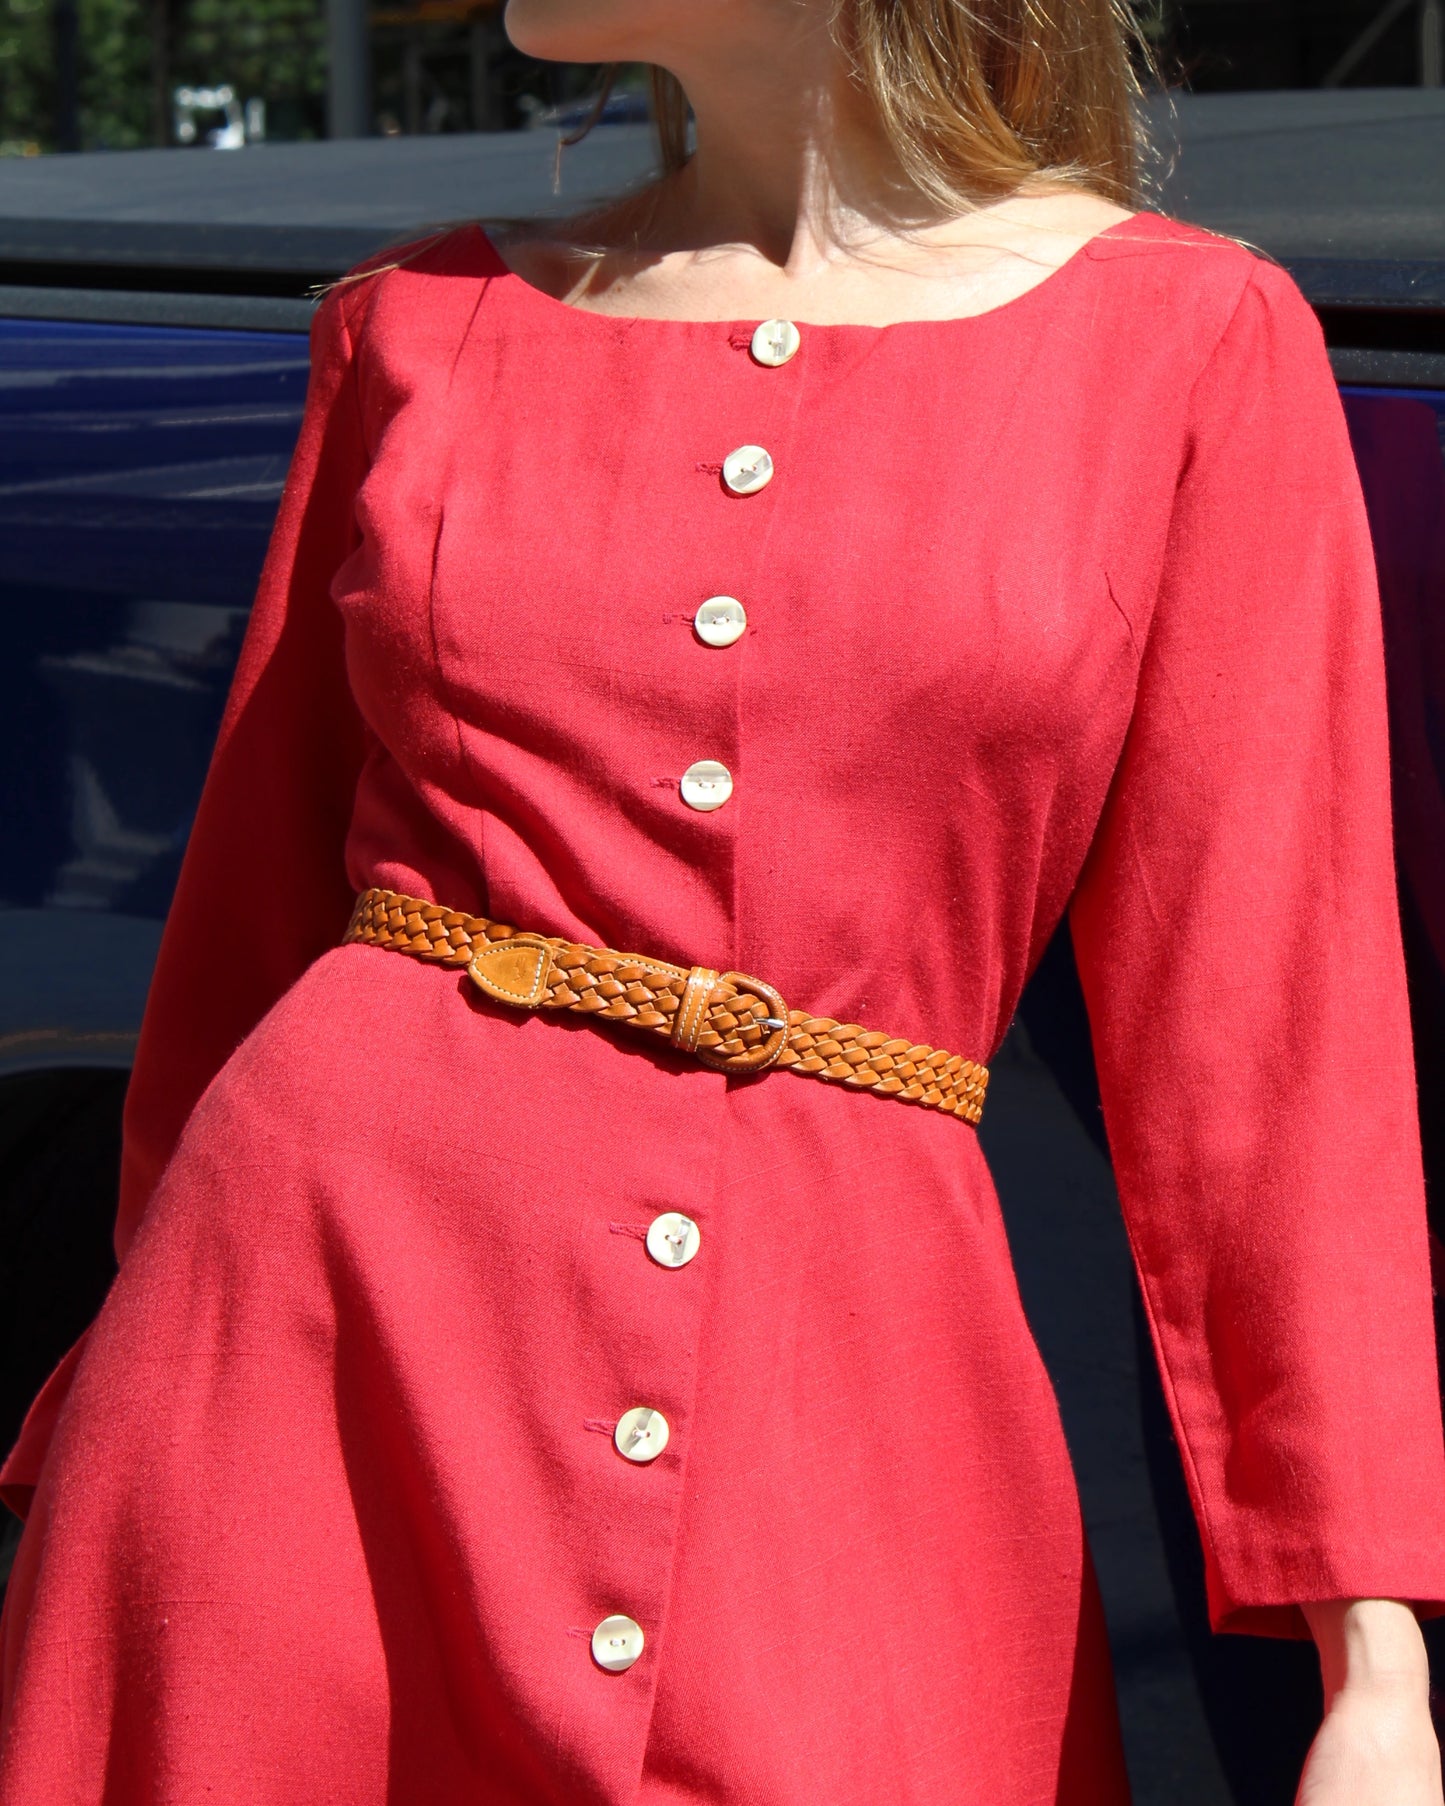 VINTAGE 1950s NEW LOOK STYLE SHIRTDRESS